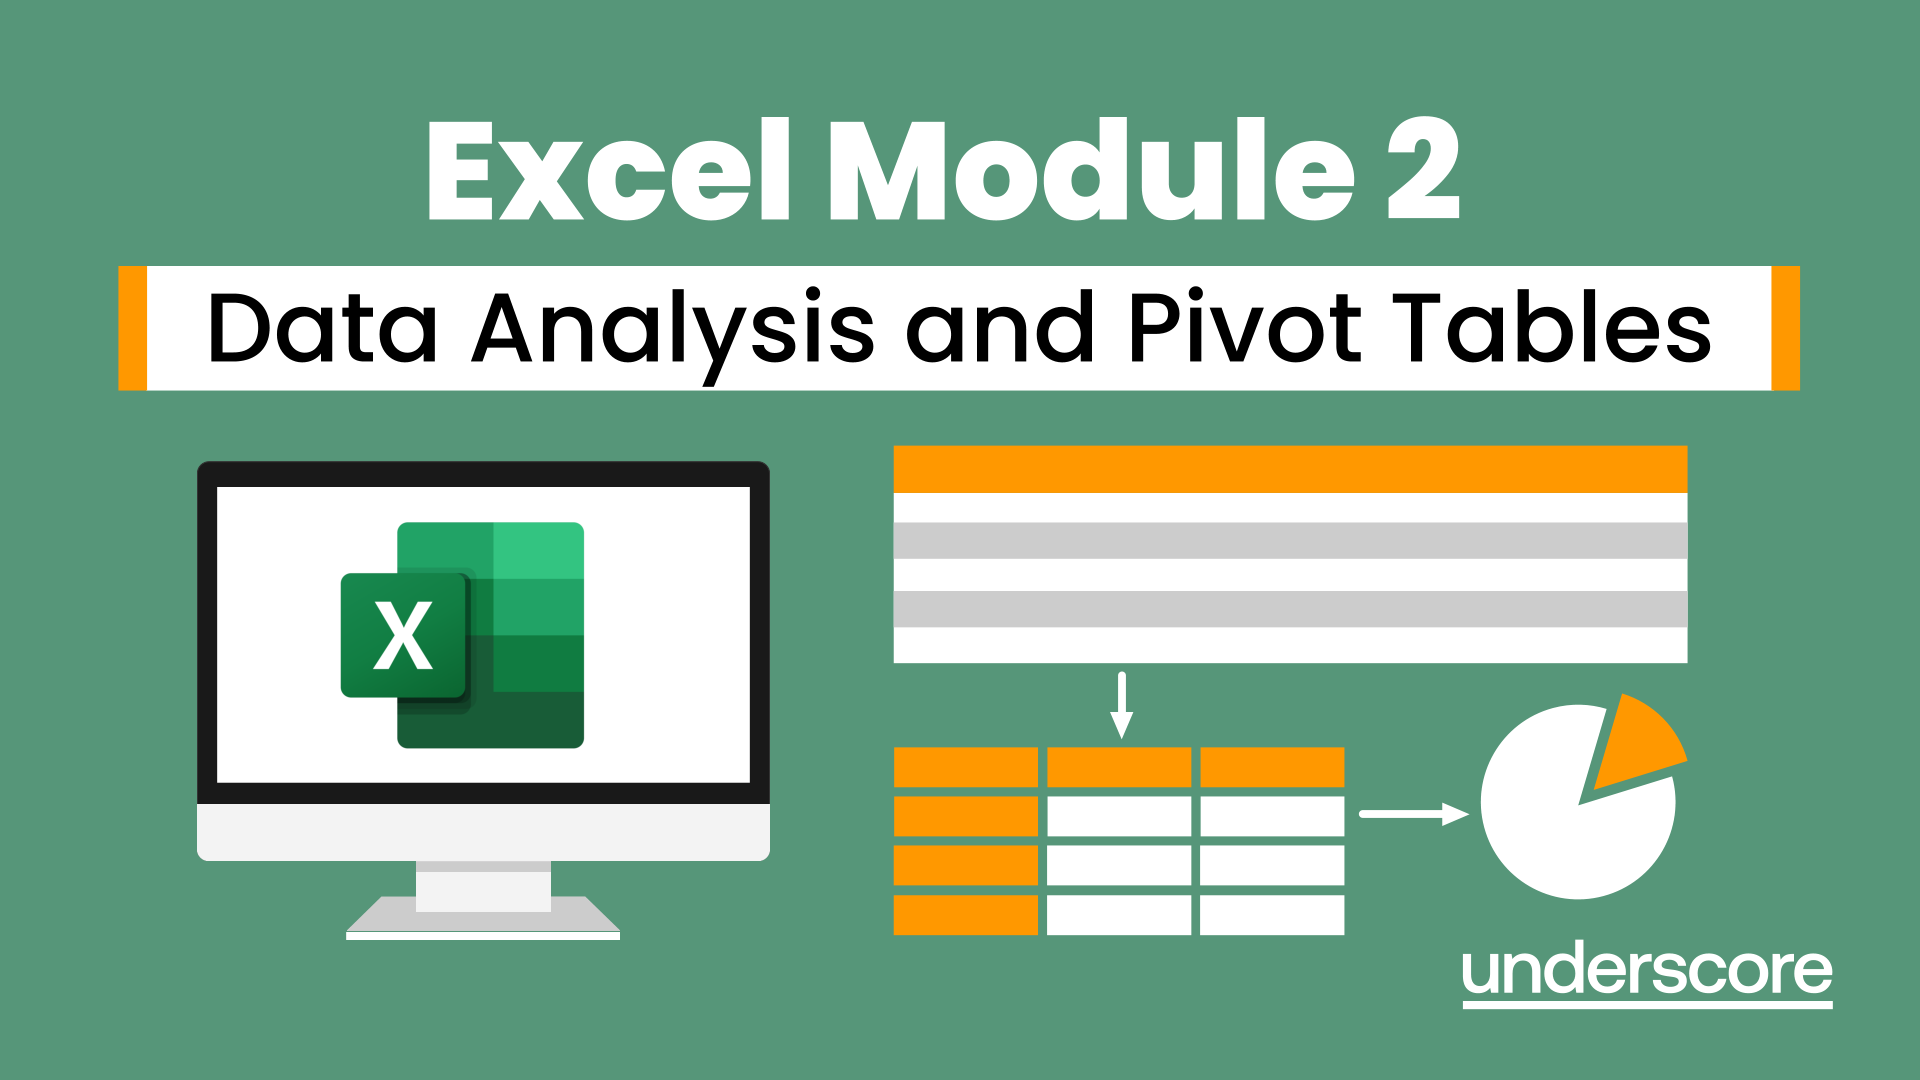 Excel Module 2 - Data Analysis and Pivot Tables